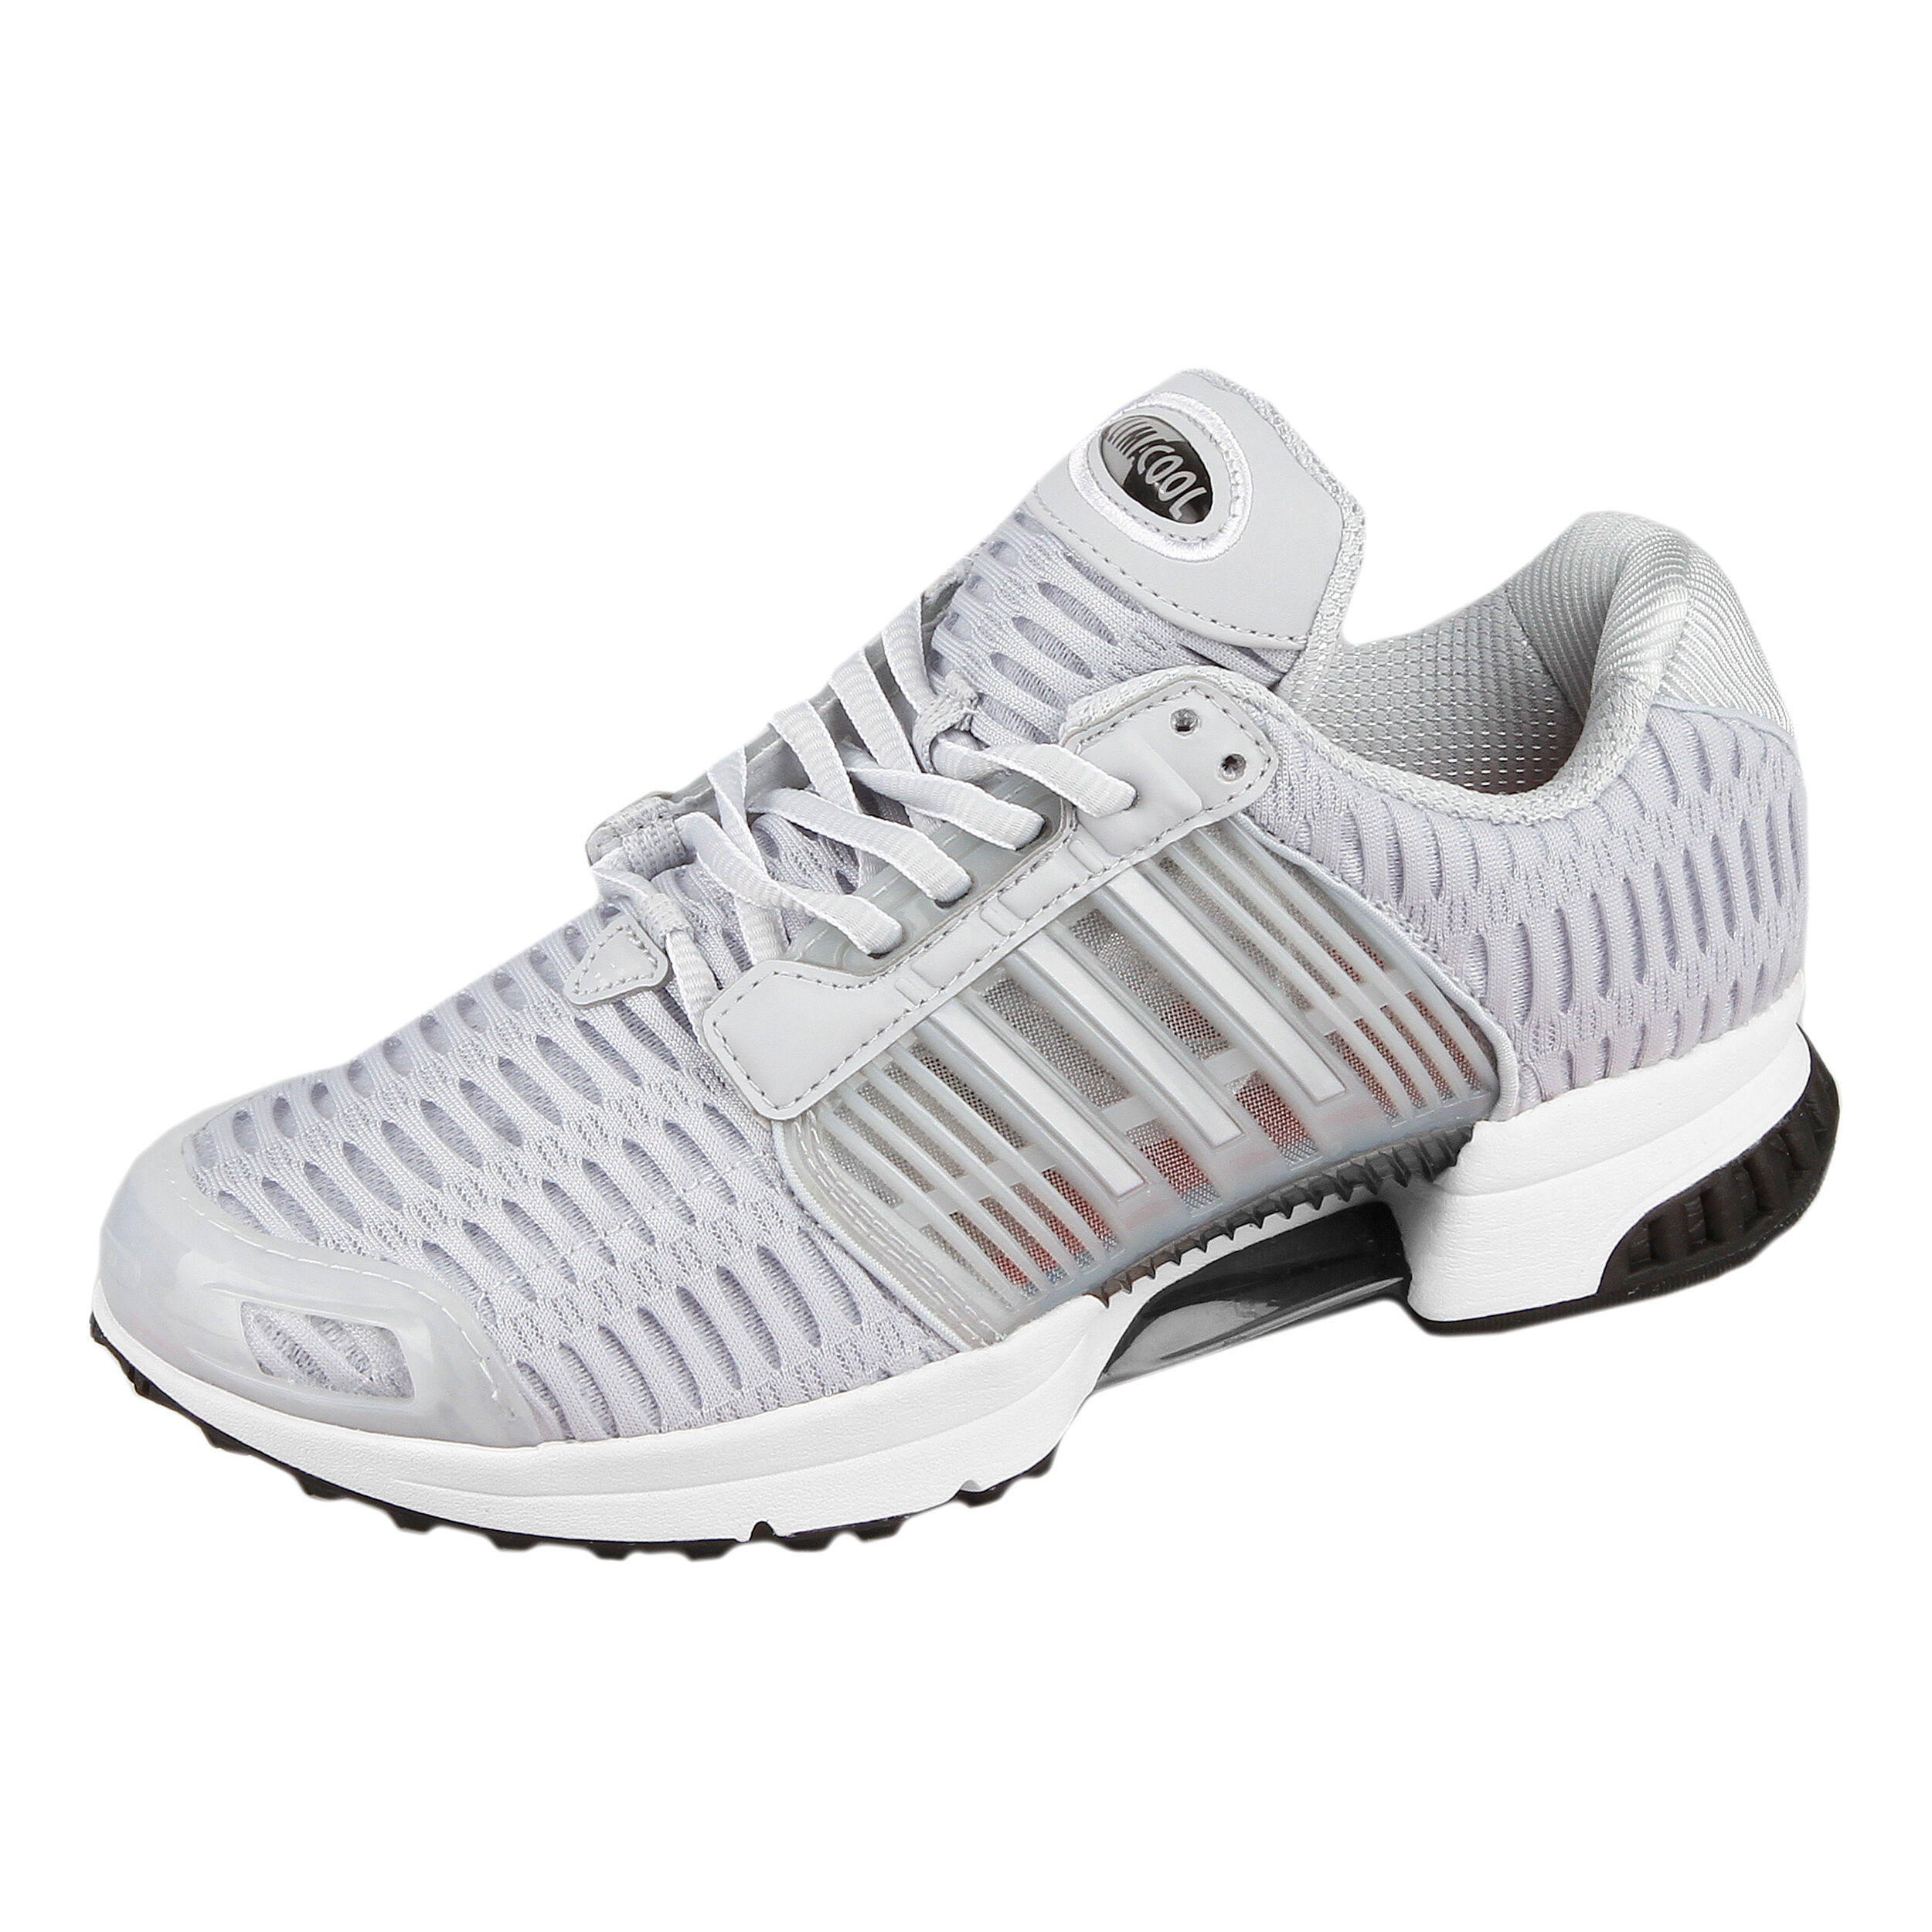 adidas climacool 5 questions